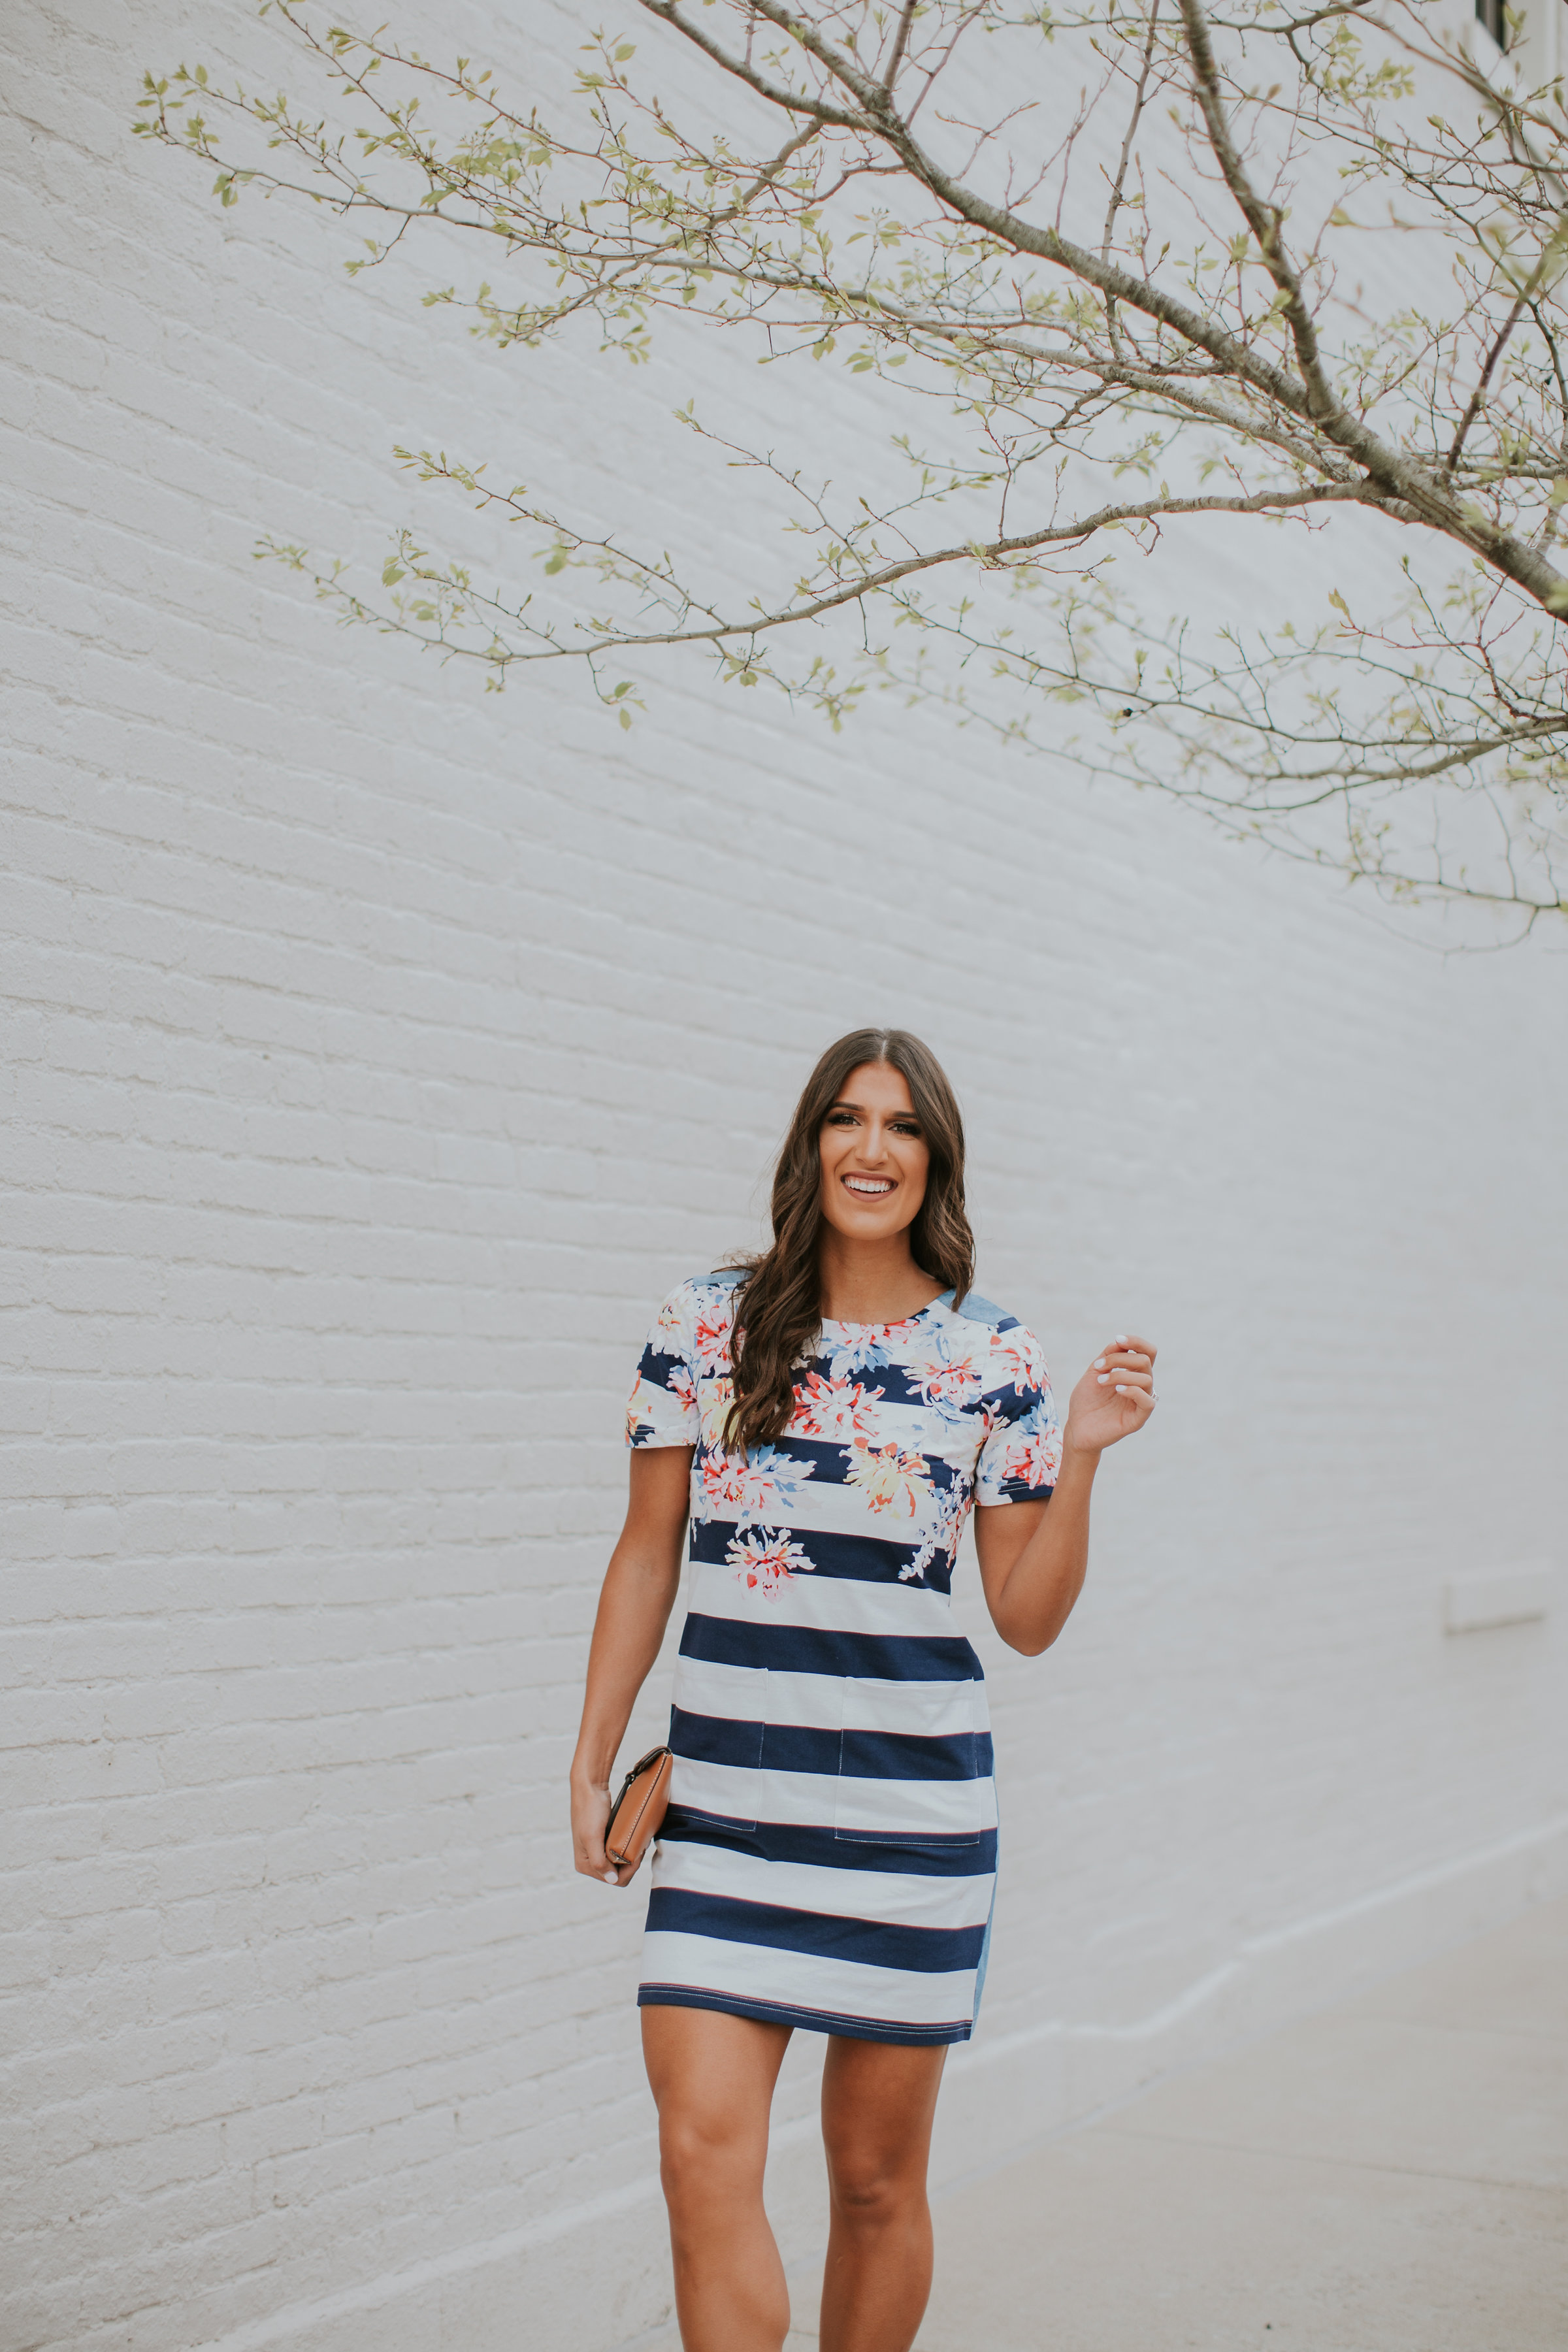 joules clothing, joules x dillards launch, joules usa, joules mini cooper, joules event, dillards joules, louisville dillards, dillards st matthews, a southern drawl meet and greet louisville // grace wainwright a southern drawl